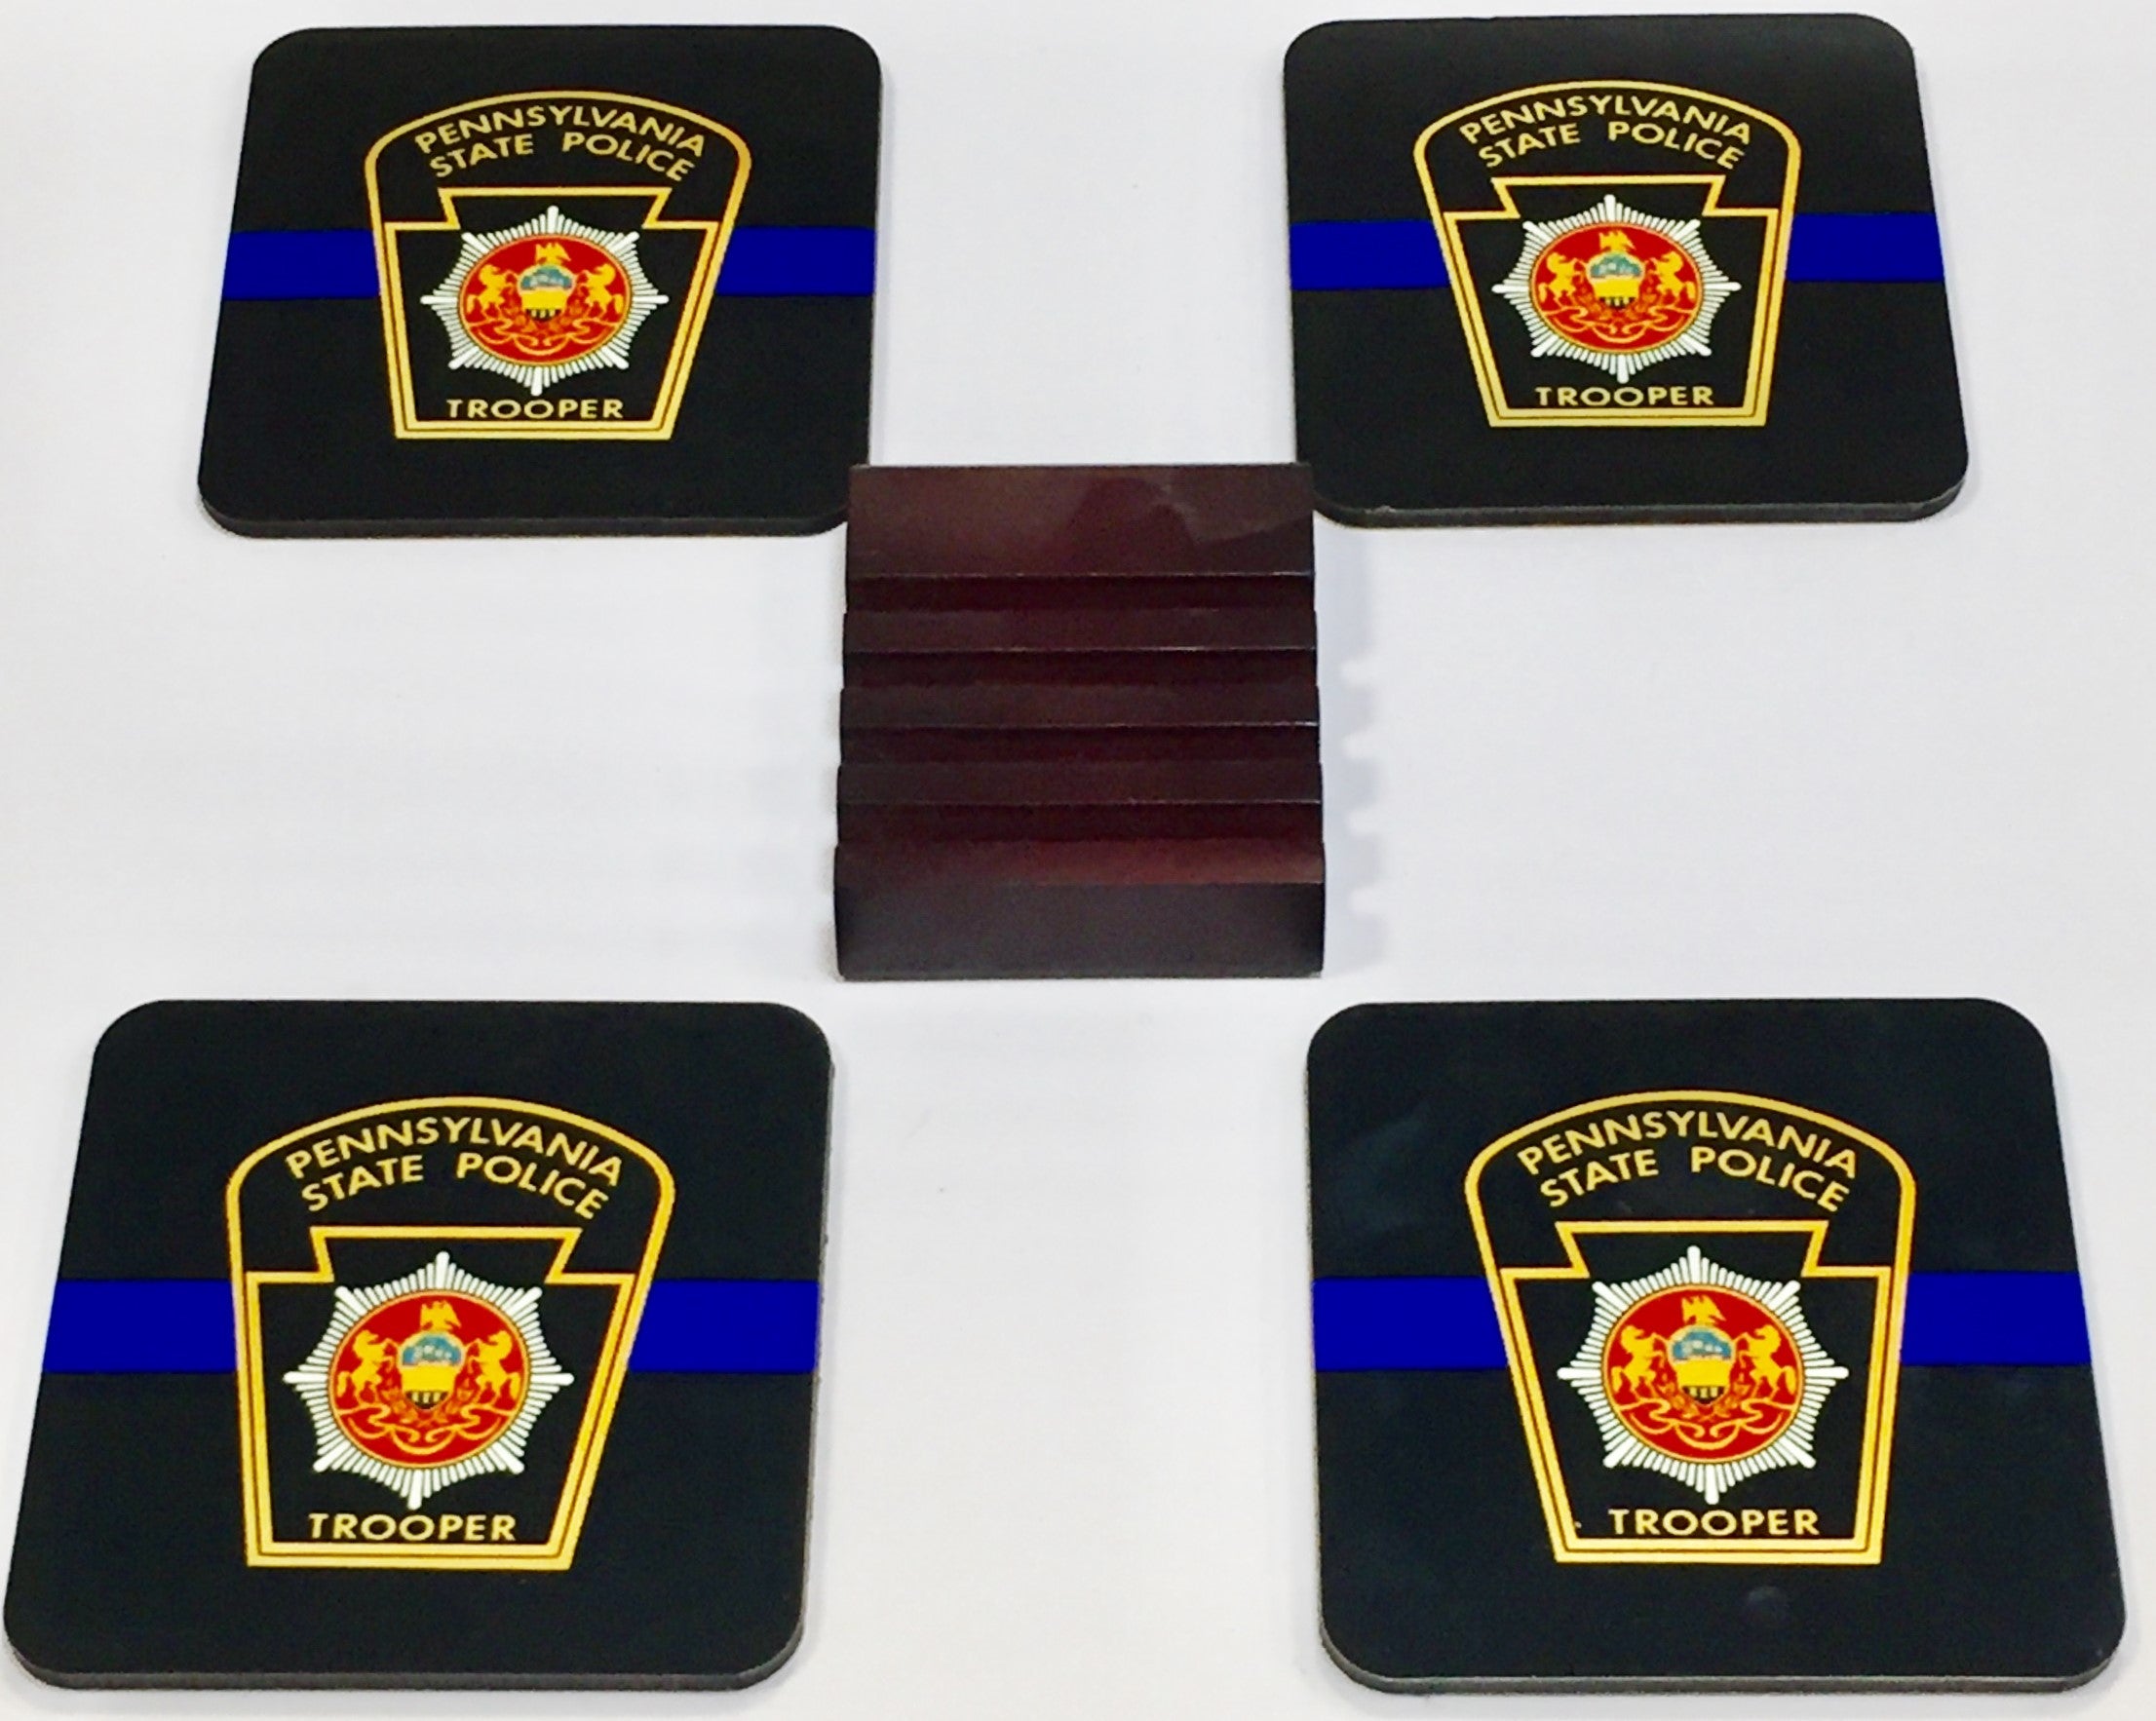 Pennsylvania State Police Trooper Coasters - Set of 4 (with Mahogany Display Stand)